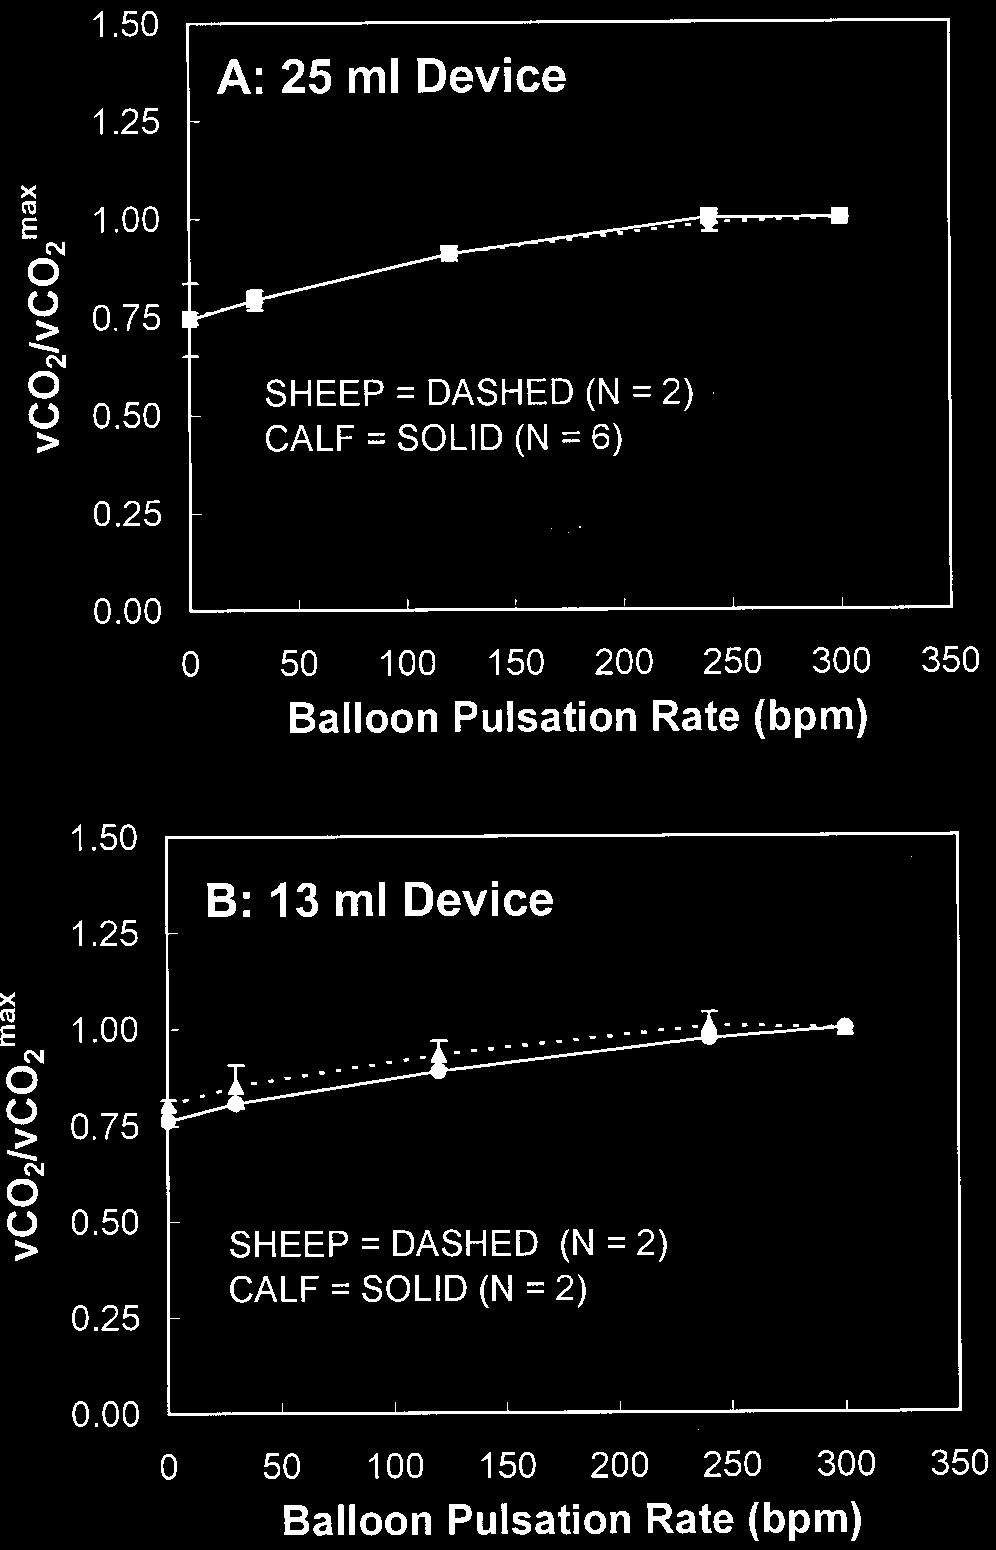 3) L/min for the calf and sheep, respectively.